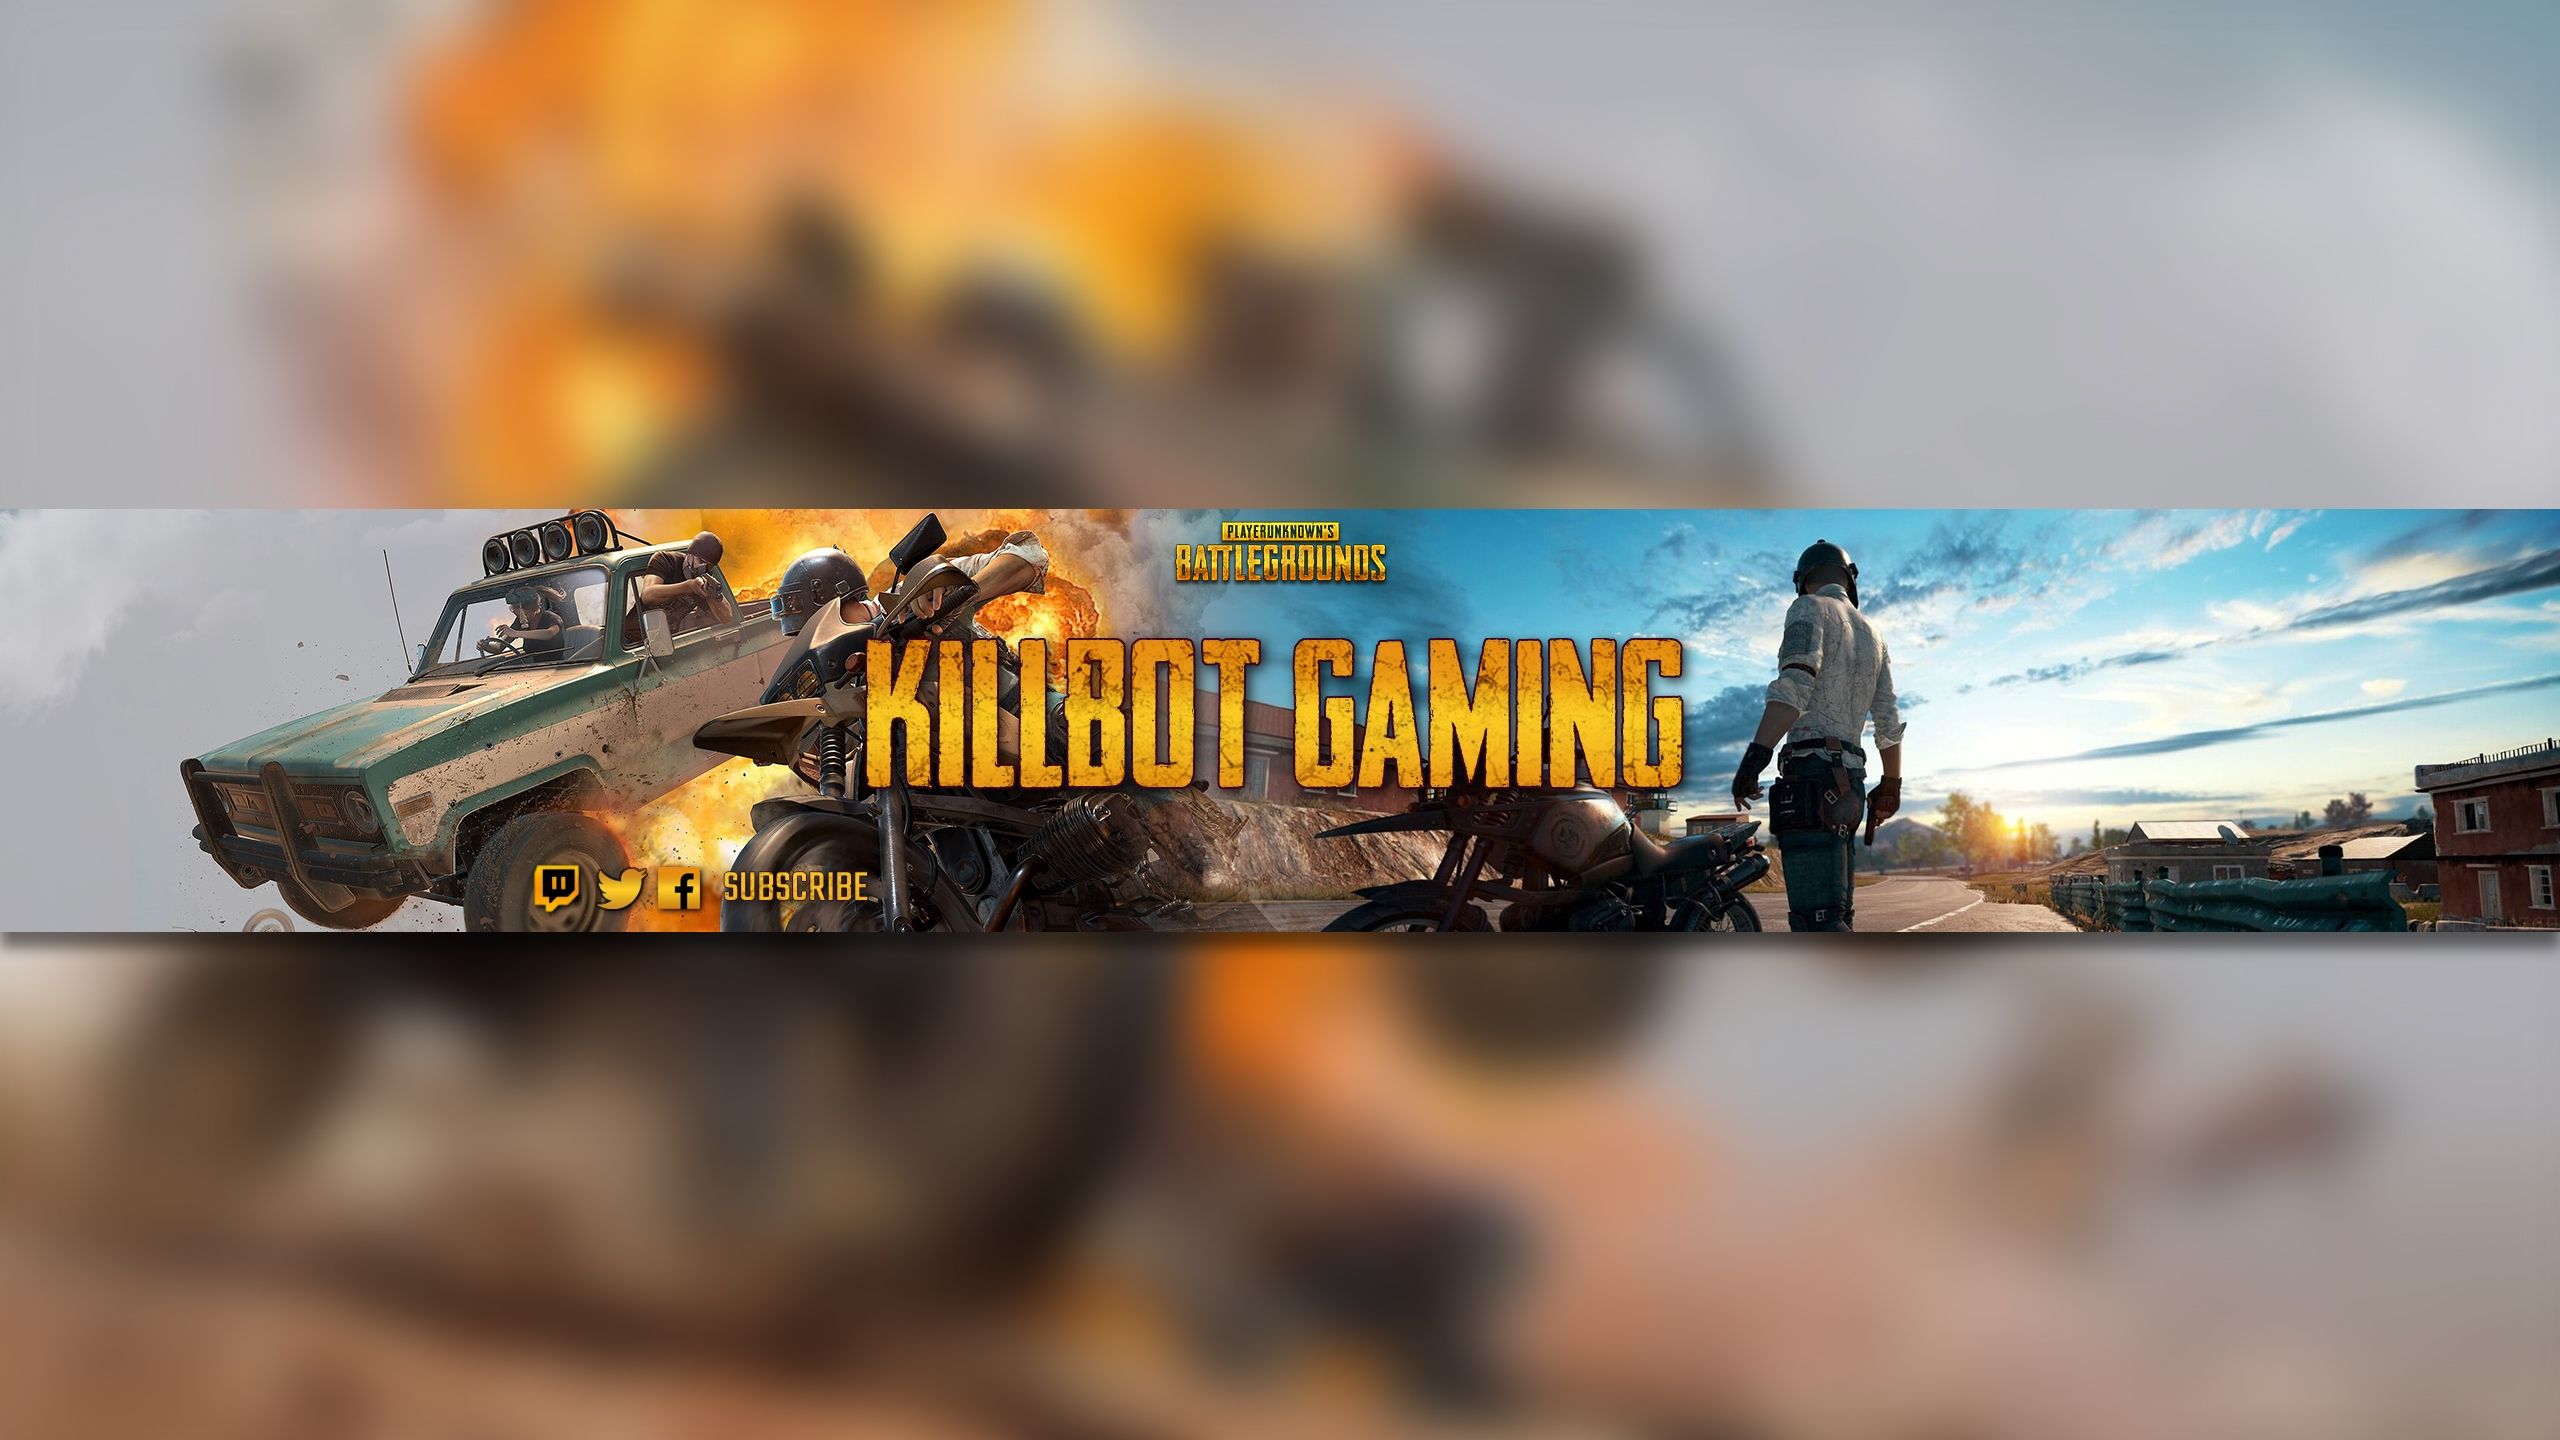 Share: Create a youtube banner game of PUBG cool